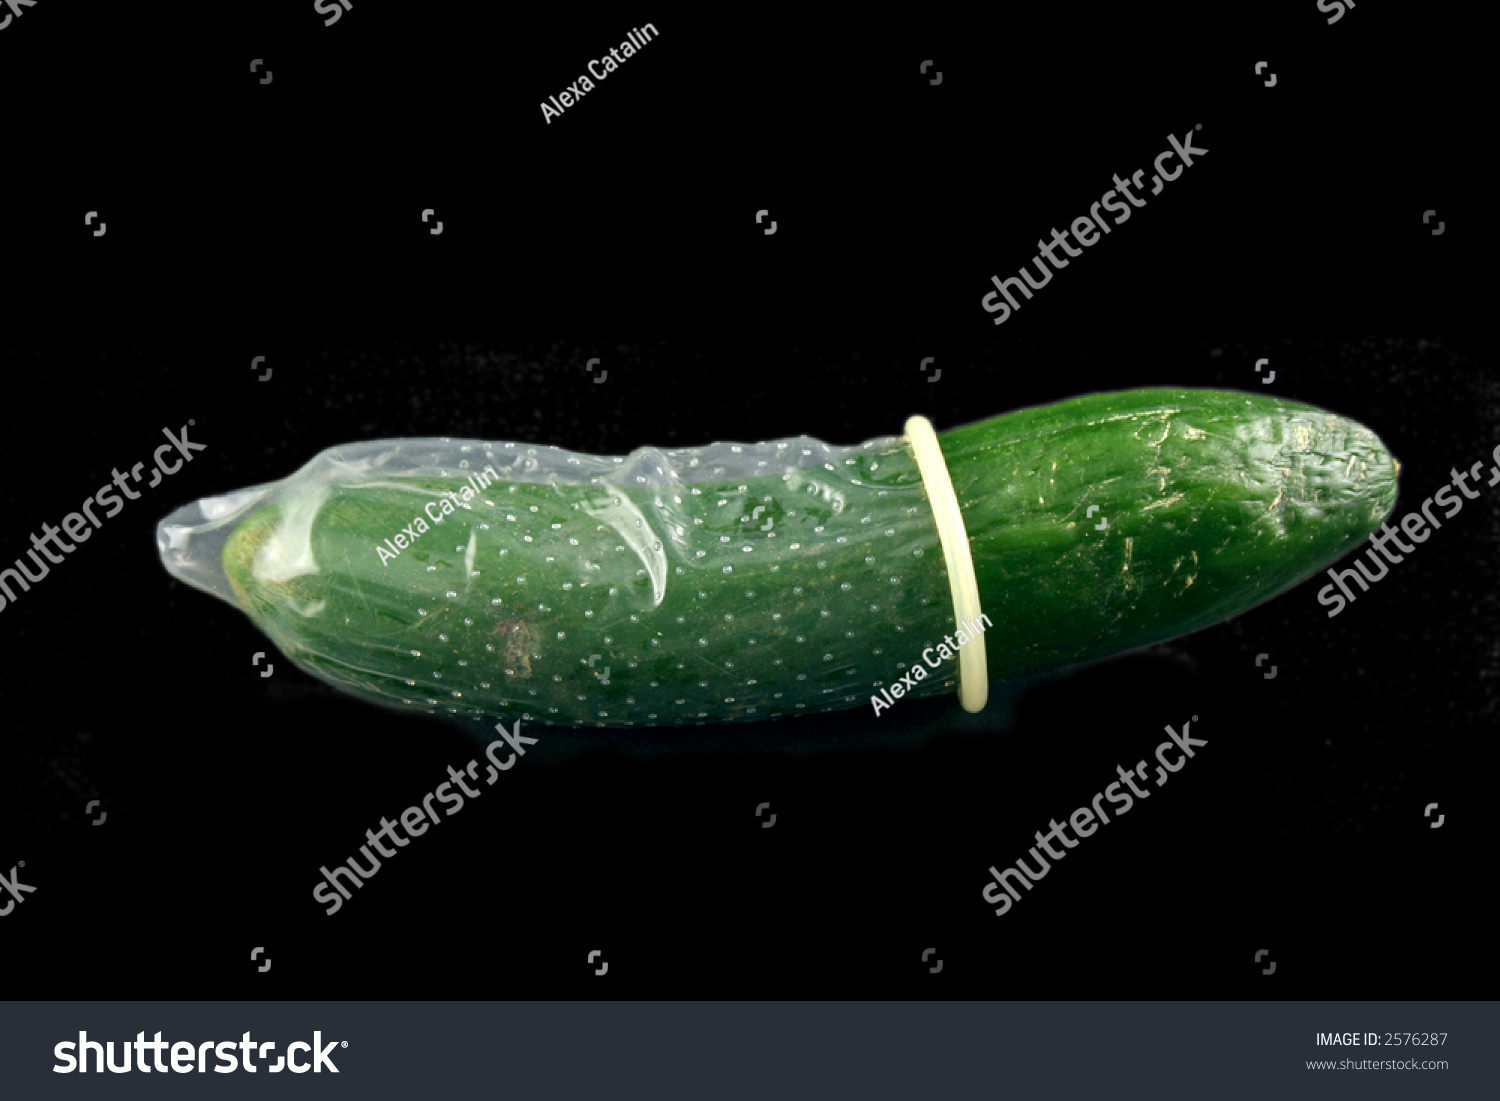 Green Cucumber With Condom On A Black Backgro